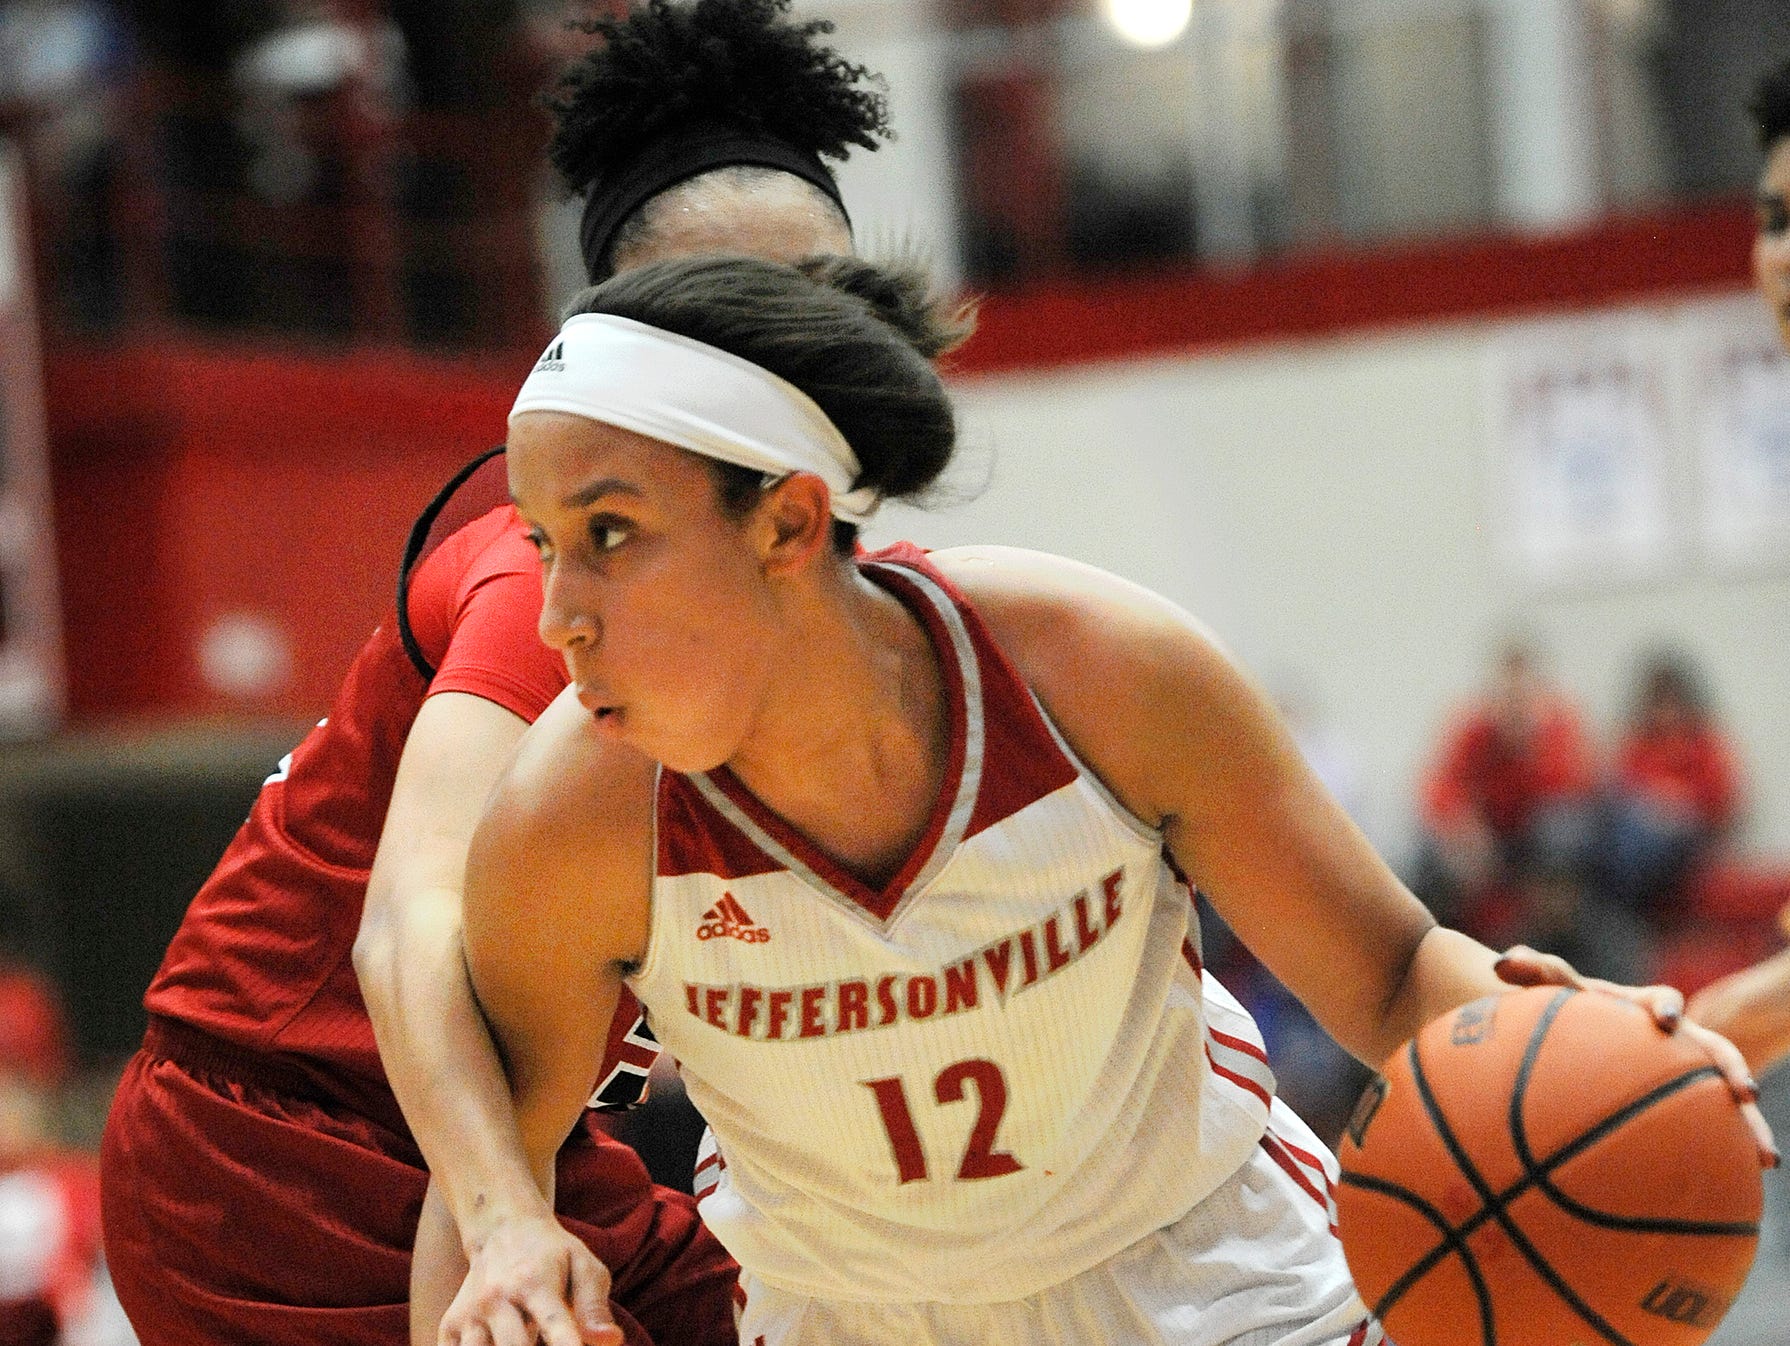 Jeffersonville's Jacinta Gibson (12) drives to the basket against New Albany on Friday at Jeffersonville High School. Jan.20, 2017